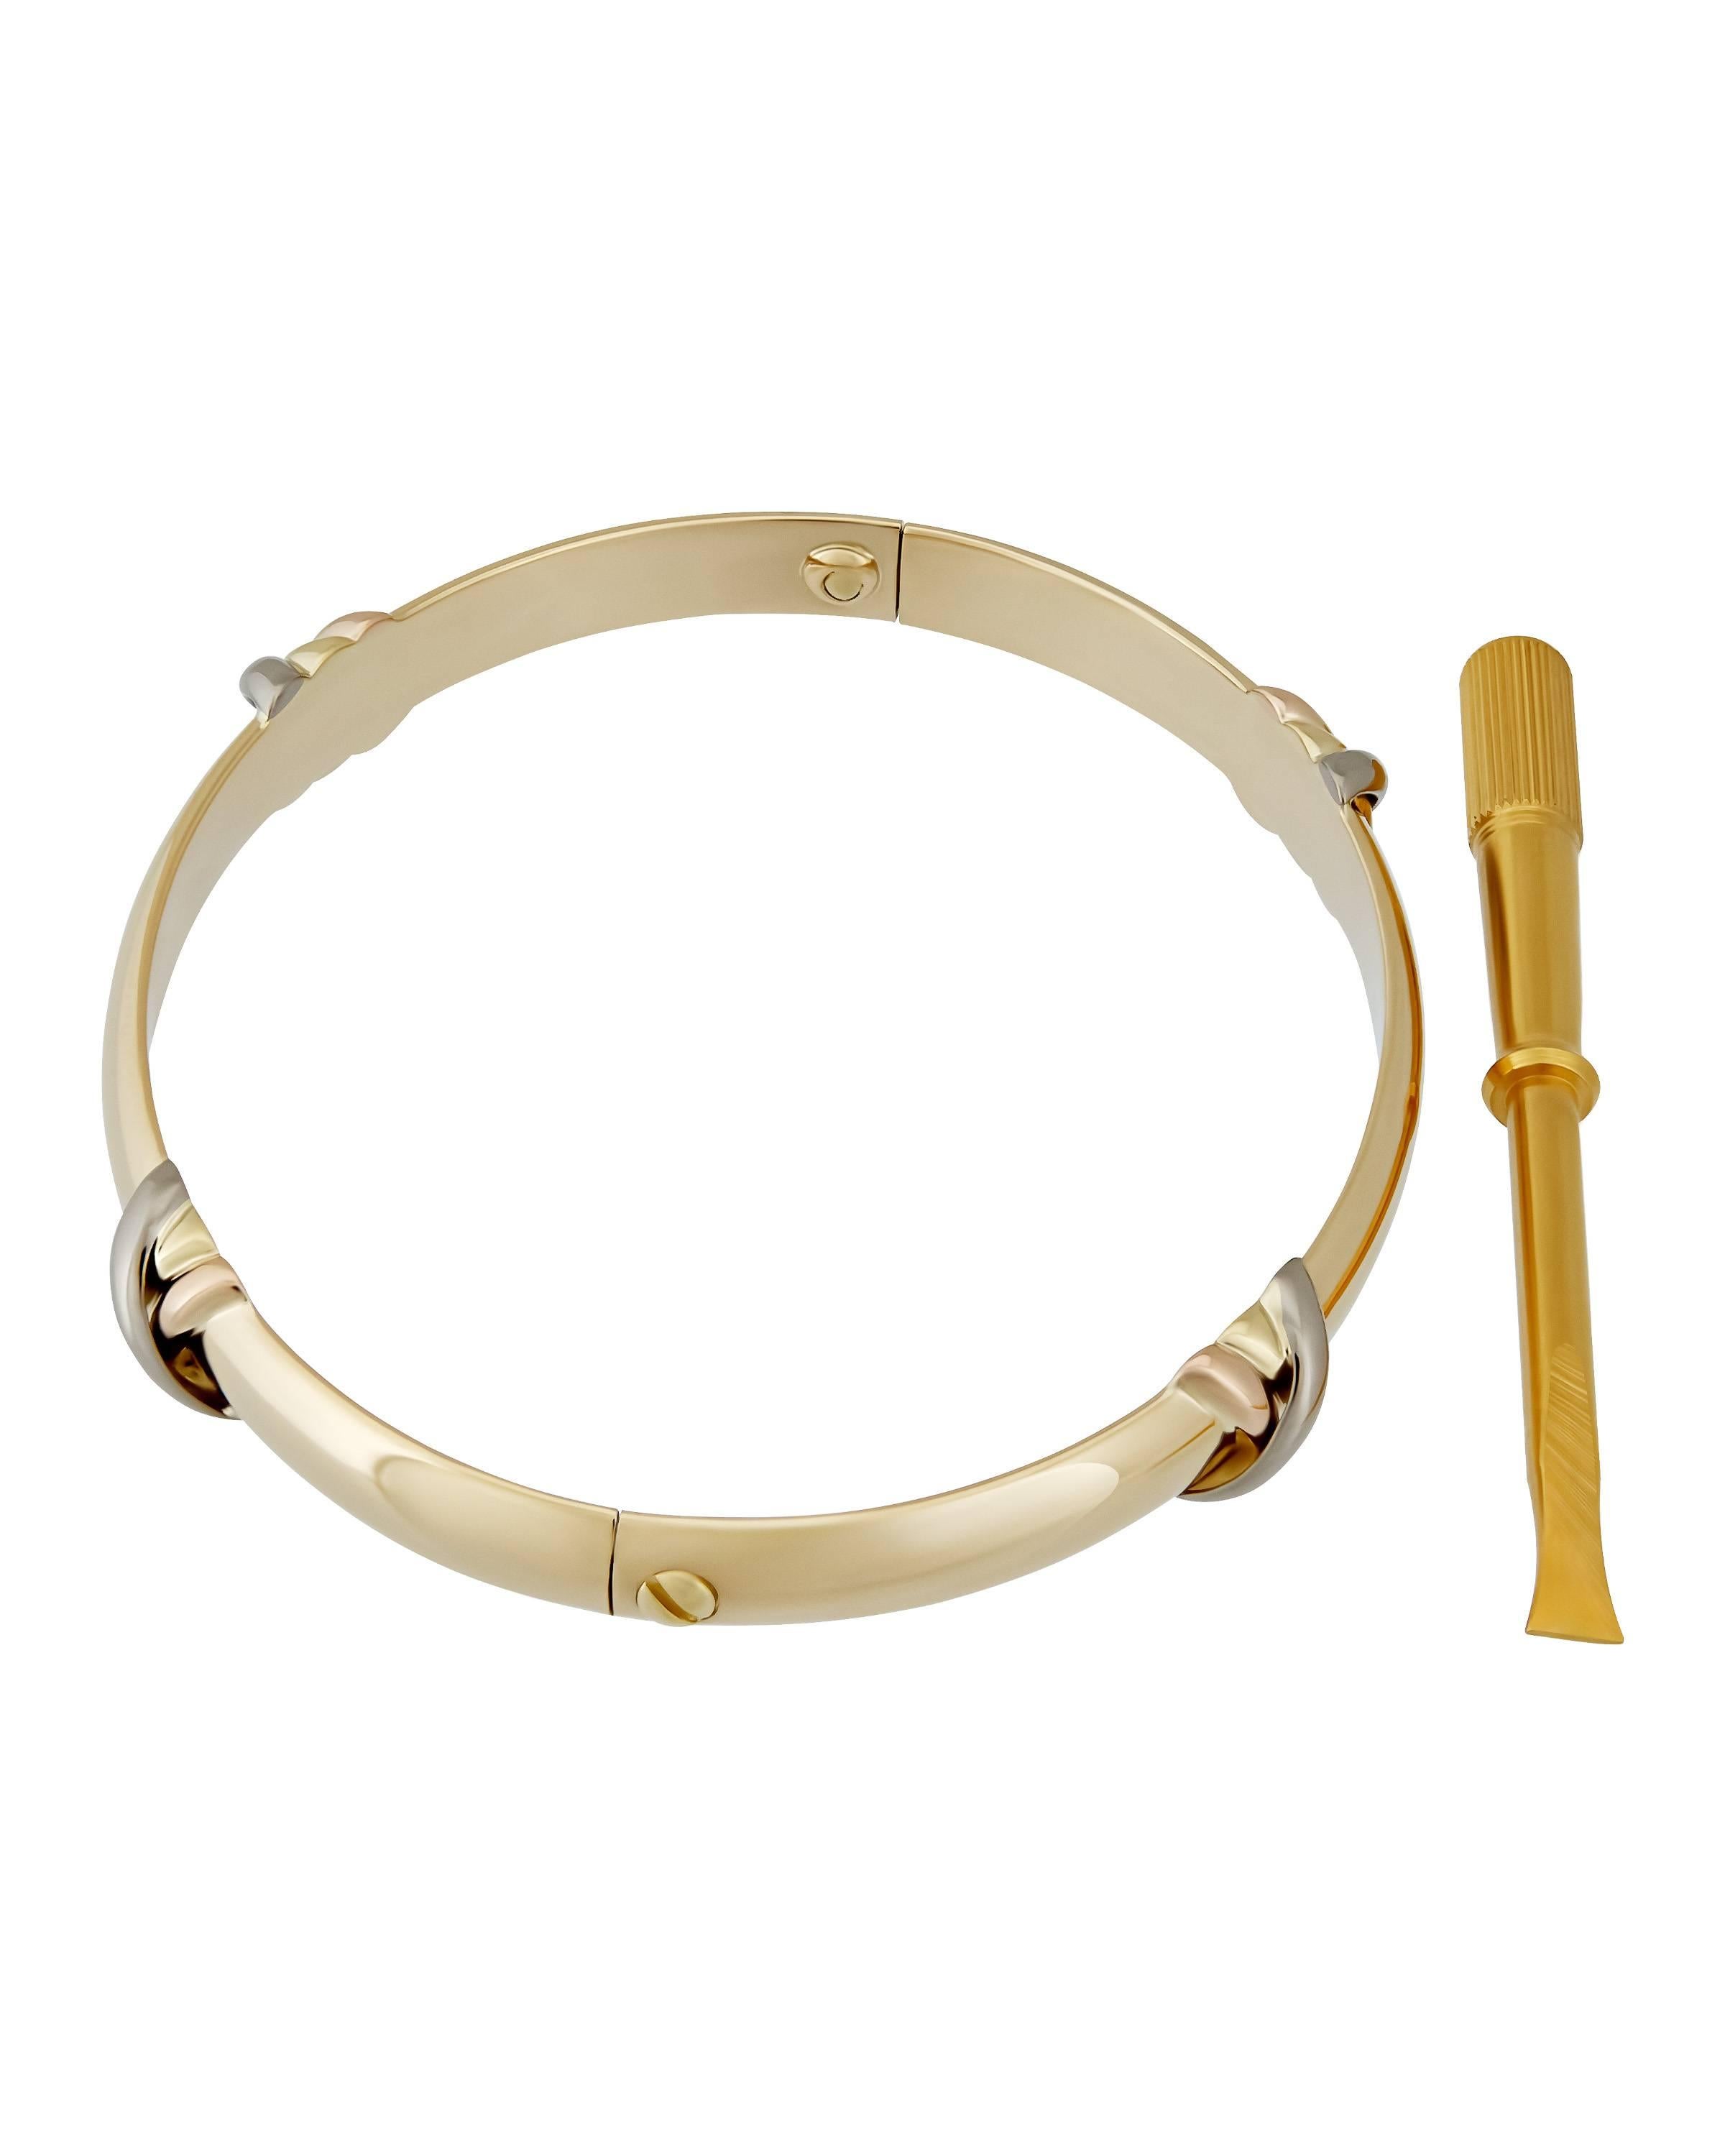 Simple, elegant, and always in style, this yellow gold bracelet is versatile enough to be a staple for any sort of occasion.

METAL TYPE: 18K Yellow & White Gold
TOTAL WEIGHT: 21.1g
BRACELET LENGTH: 17 cm